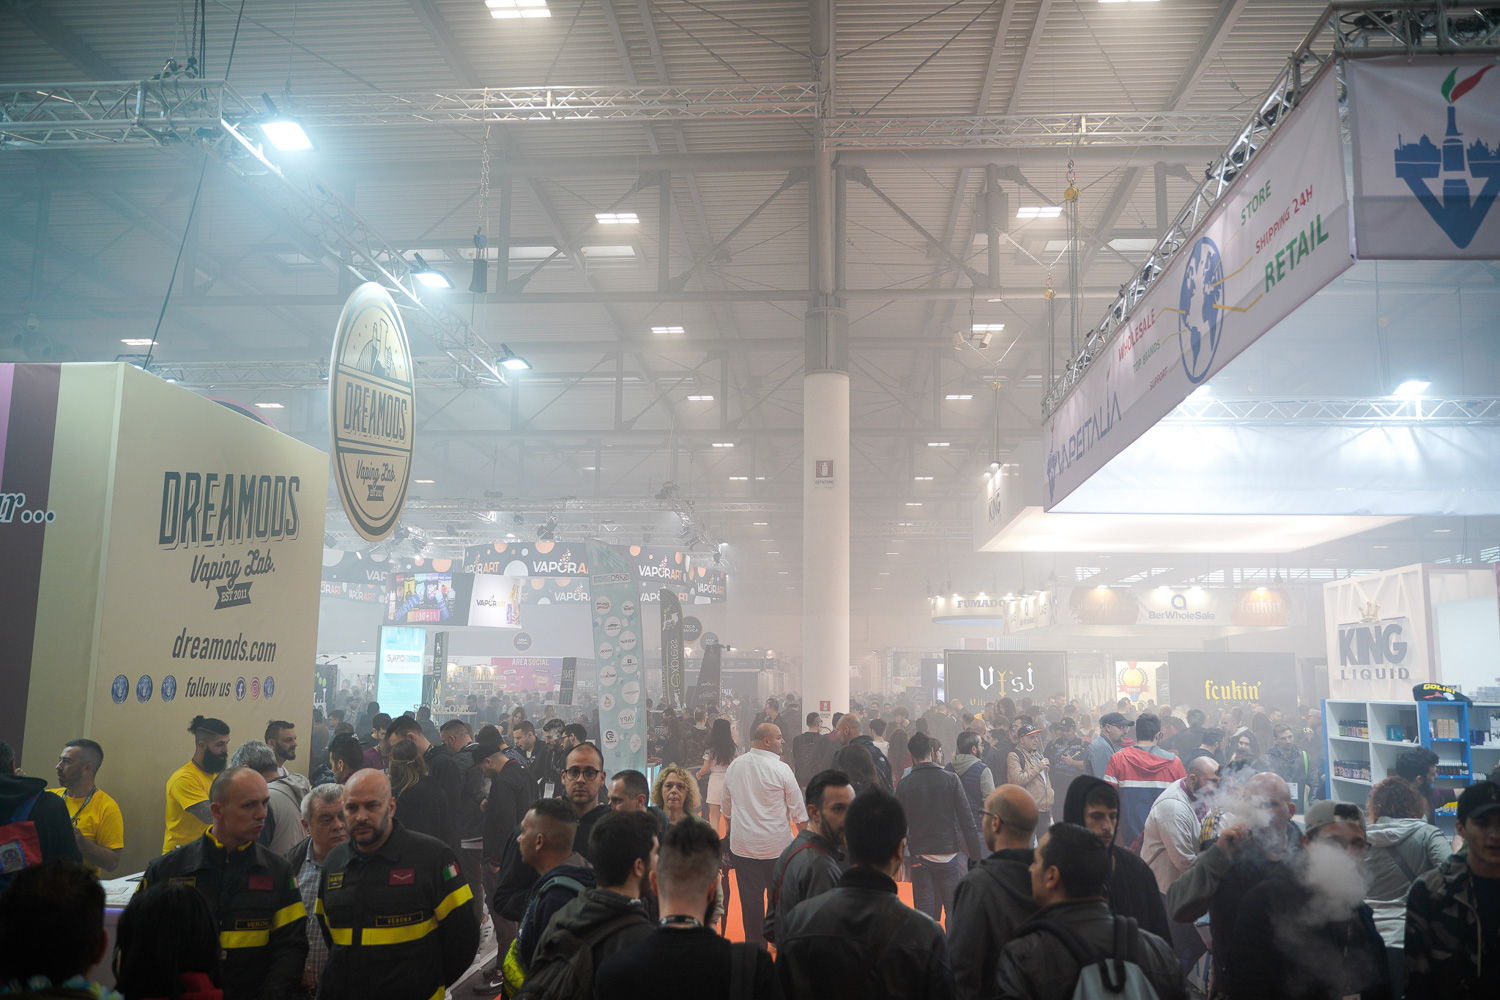 VAPITALY 2020: EXHIBITION SPACES NOW ON SALE FOR THE 6th EDITION 